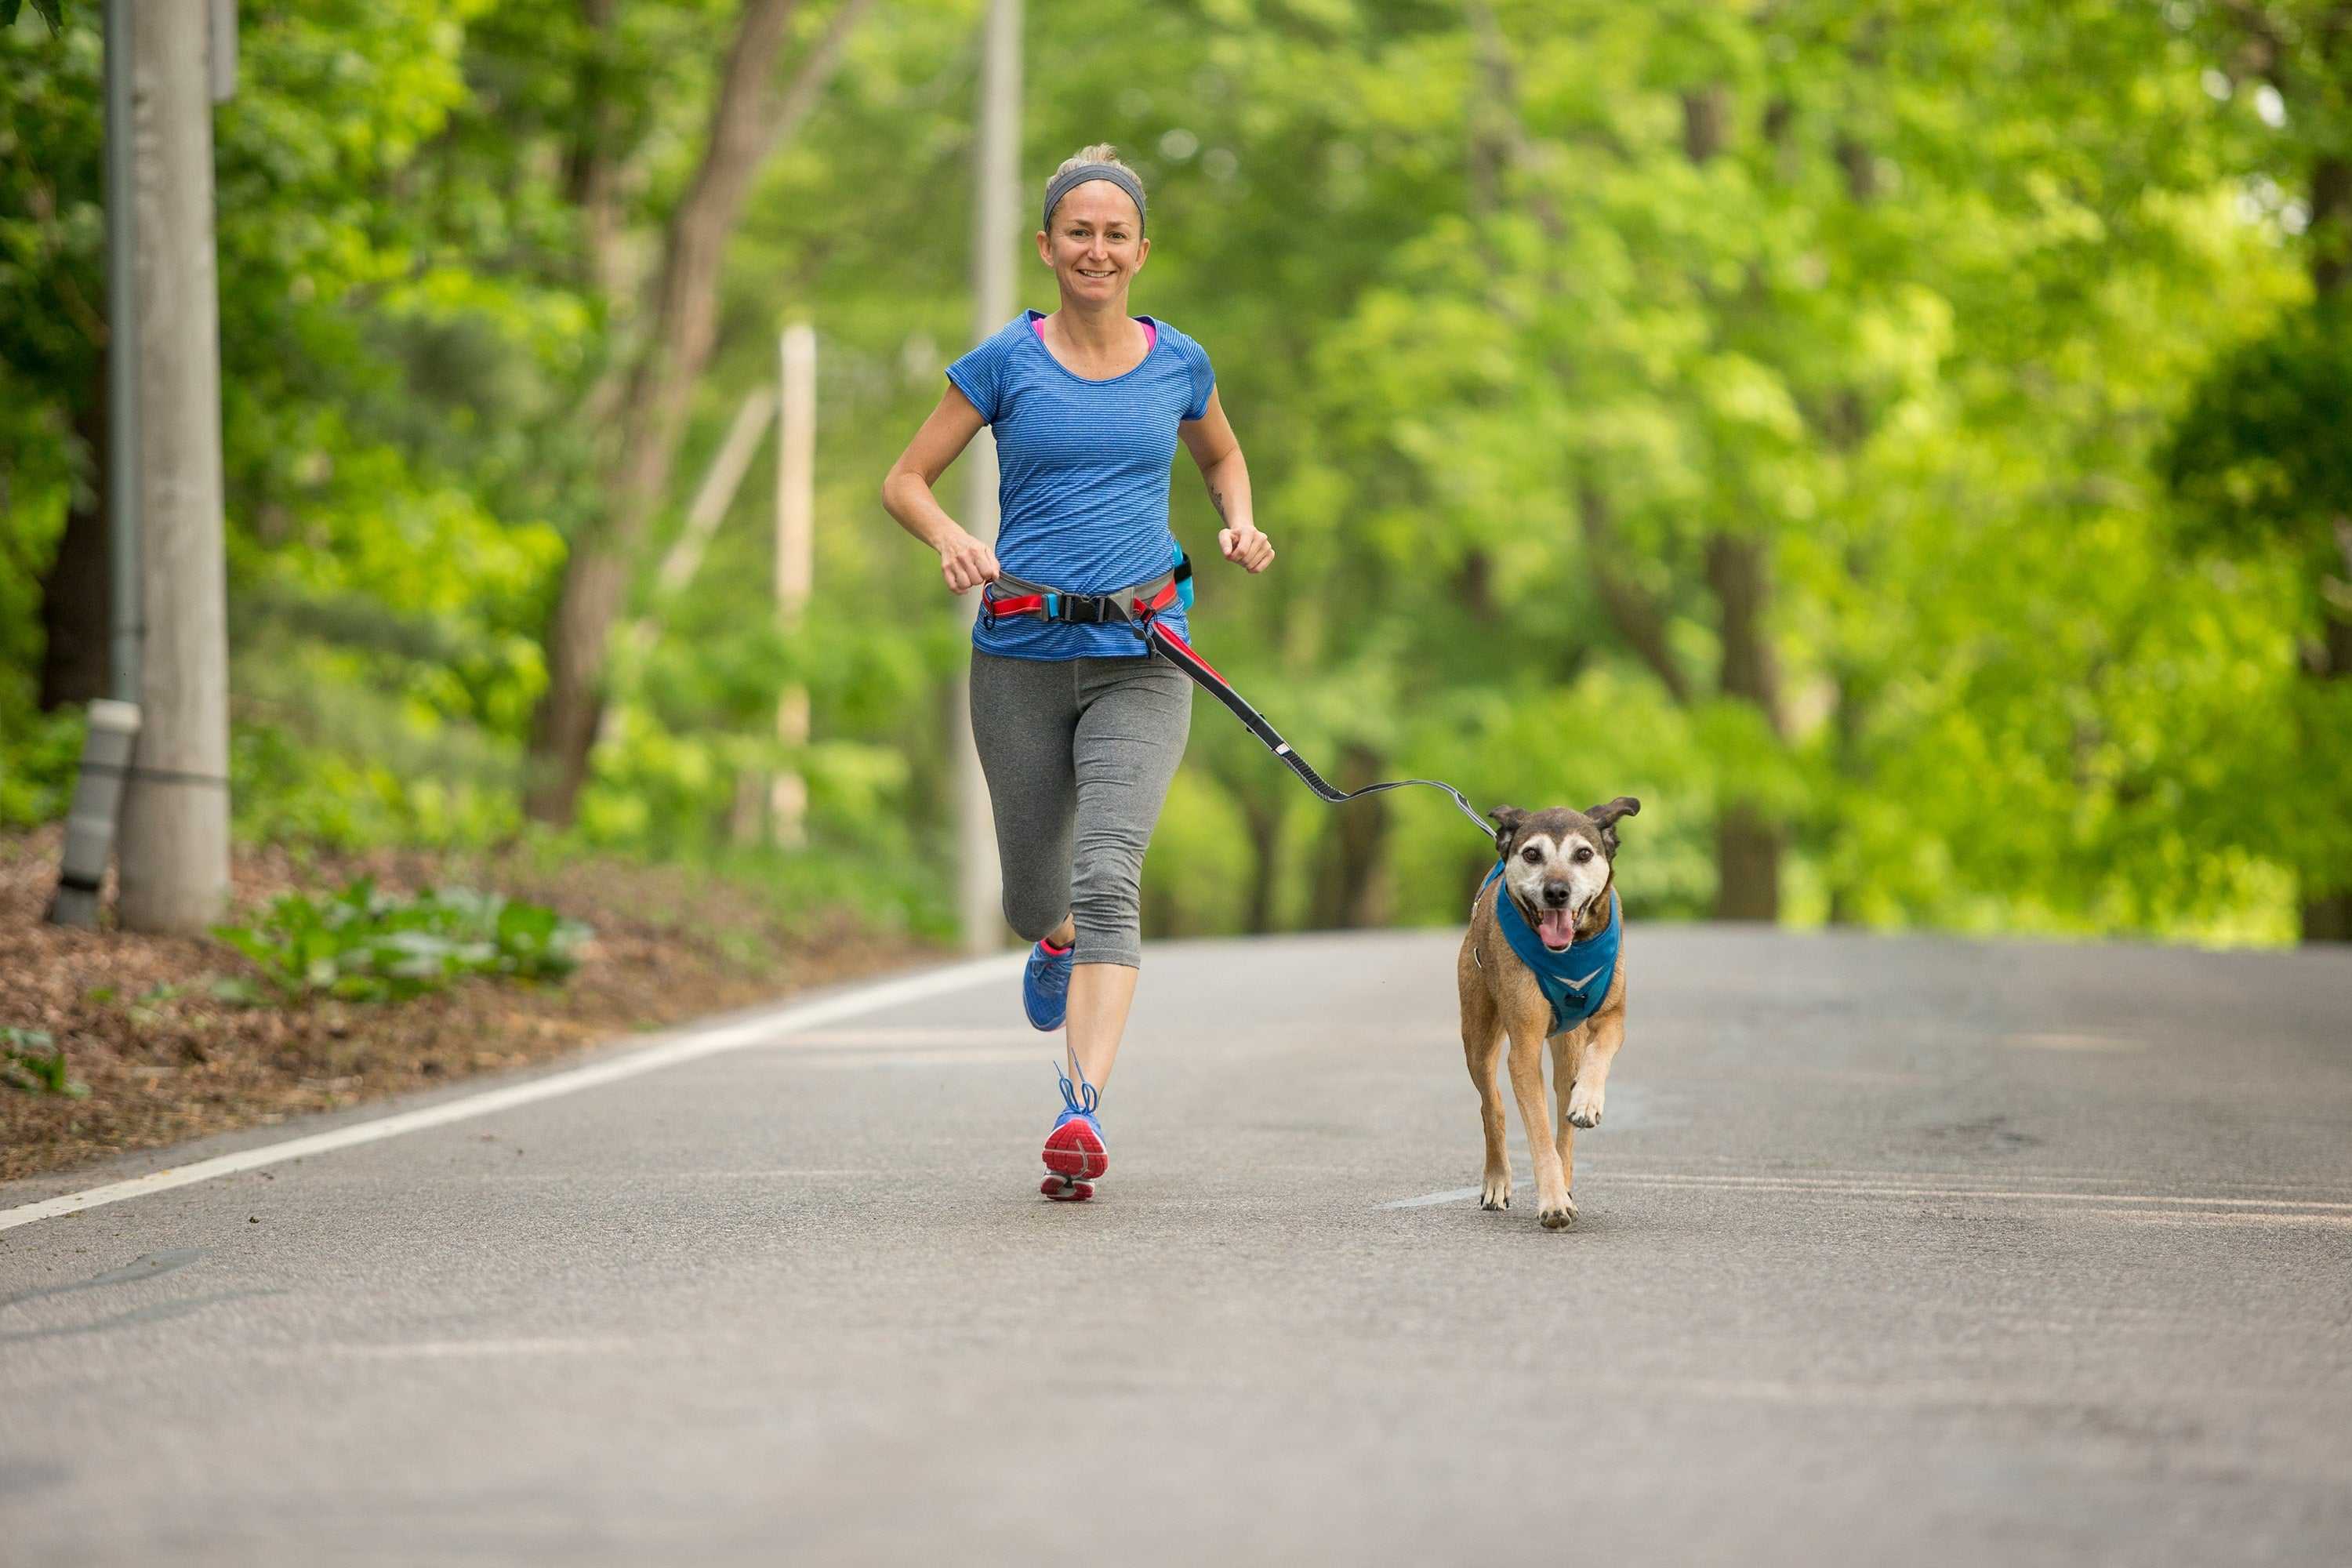 Upcoming Running Events with Your Dog